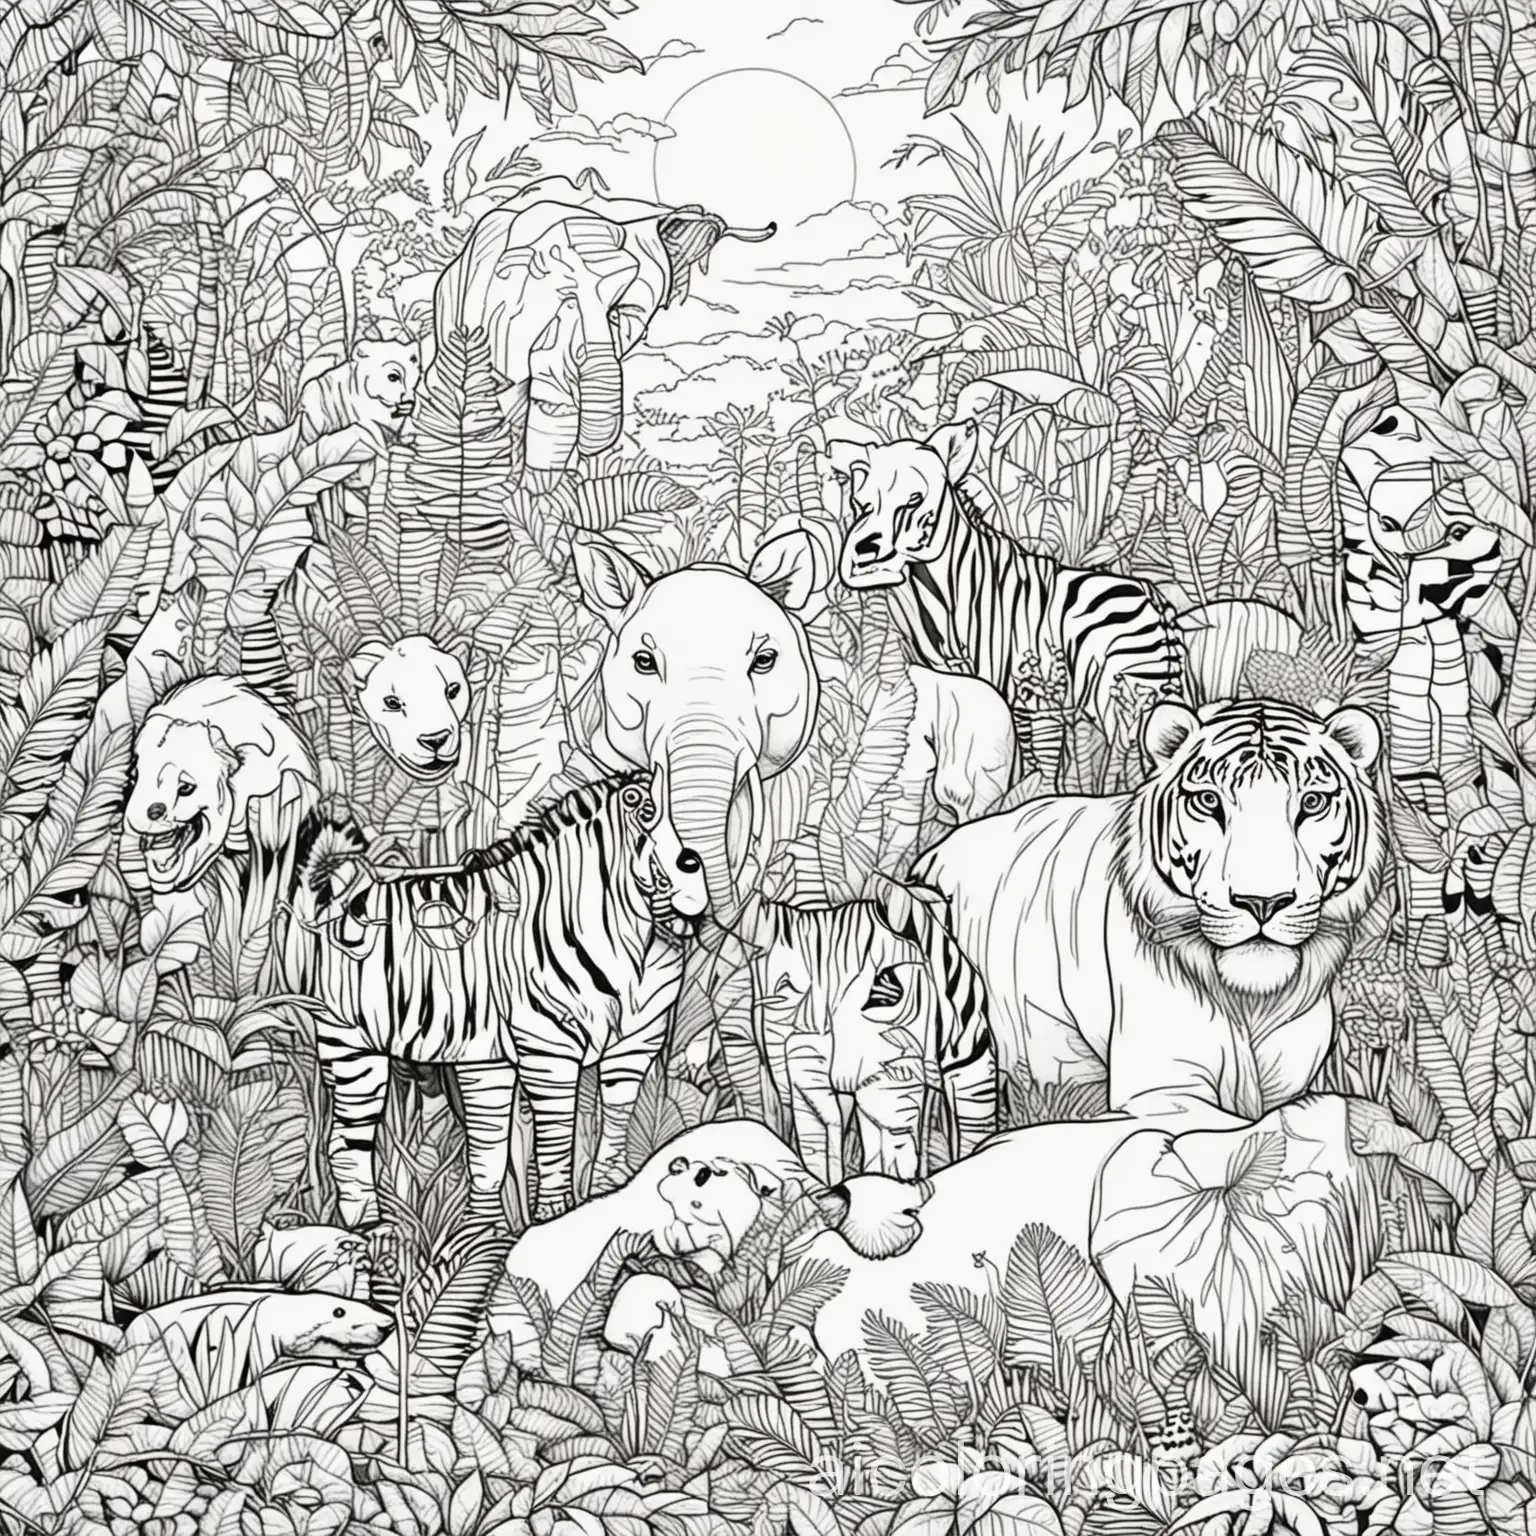 jungle animals coloring book cover page, Coloring Page, black and white, line art, white background, Simplicity, Ample White Space. The background of the coloring page is plain white to make it easy for young children to color within the lines. The outlines of all the subjects are easy to distinguish, making it simple for kids to color without too much difficulty